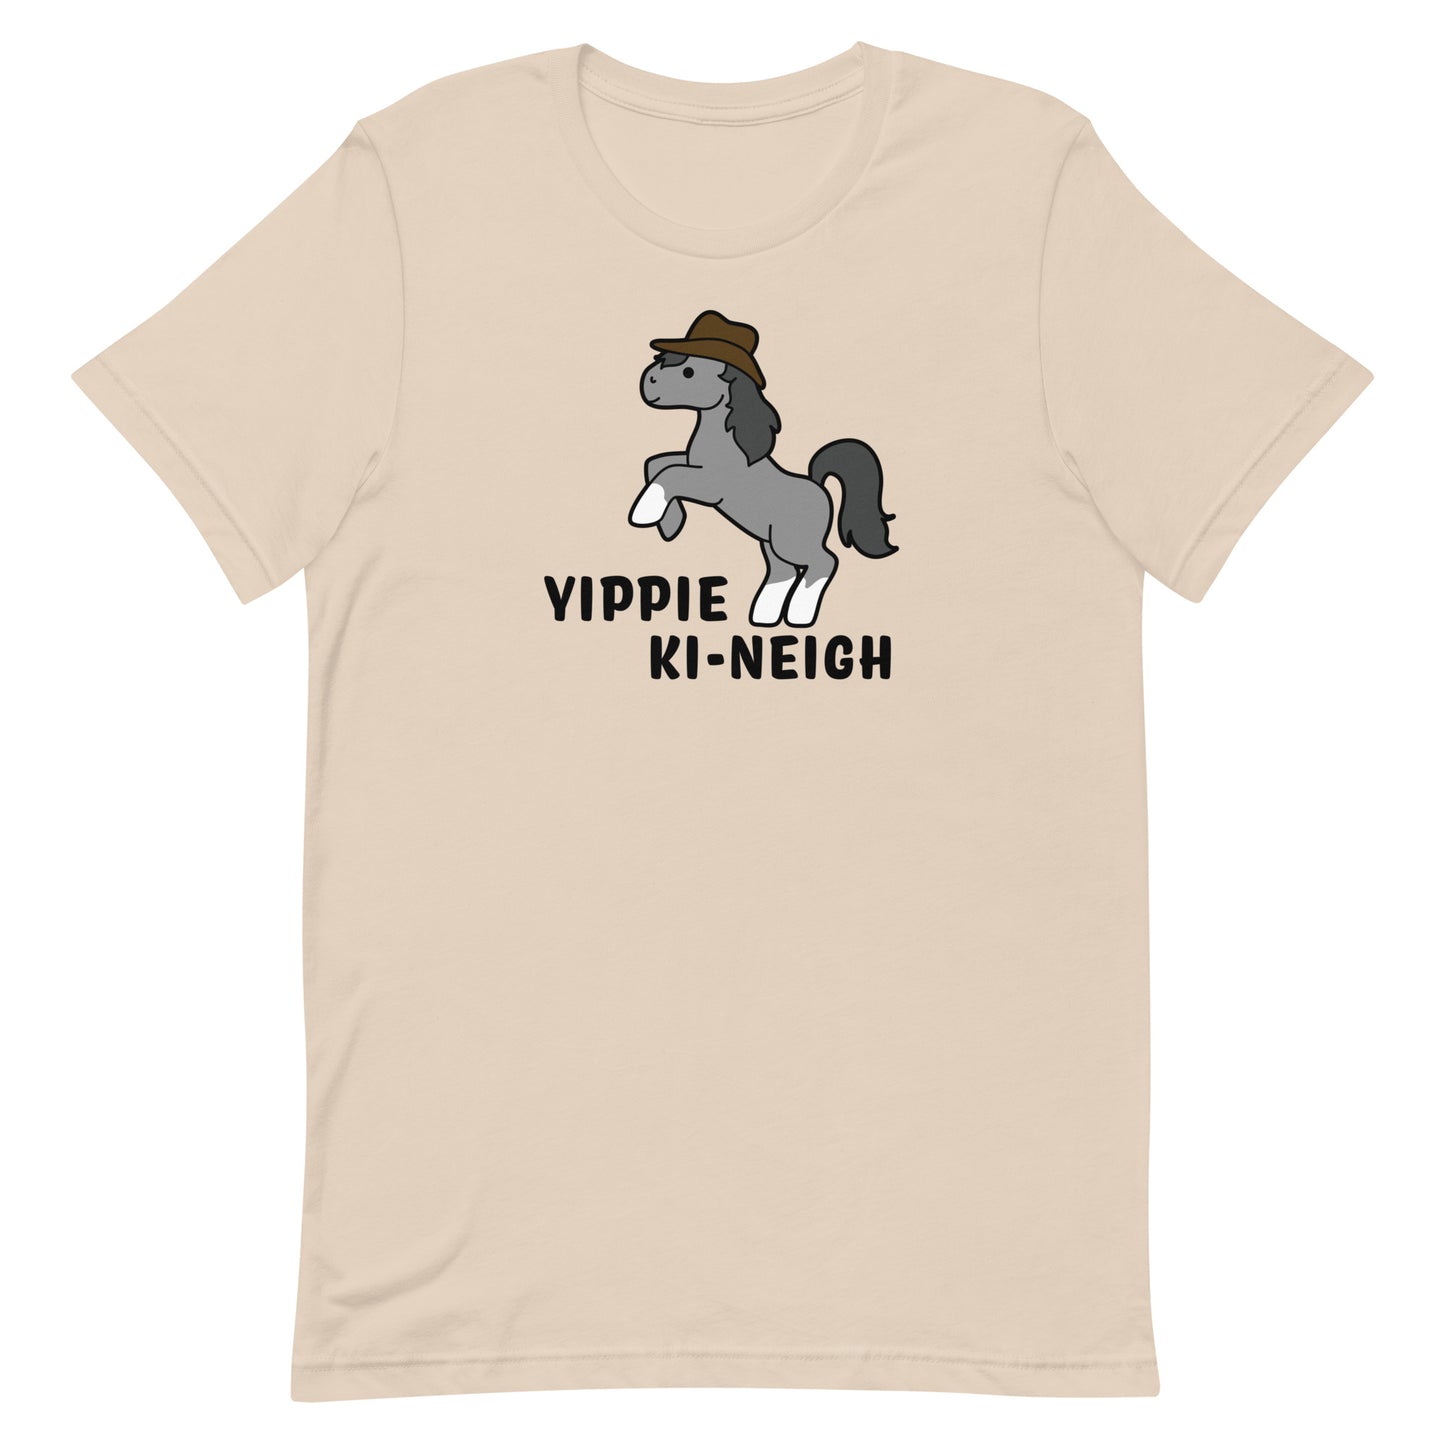 A cream crewneck t-shirt featuring an illustration of a smiling grey pony rearing and wearing a cowboy hat. Text underneath the pony reads "Yippie Ki-Neigh"